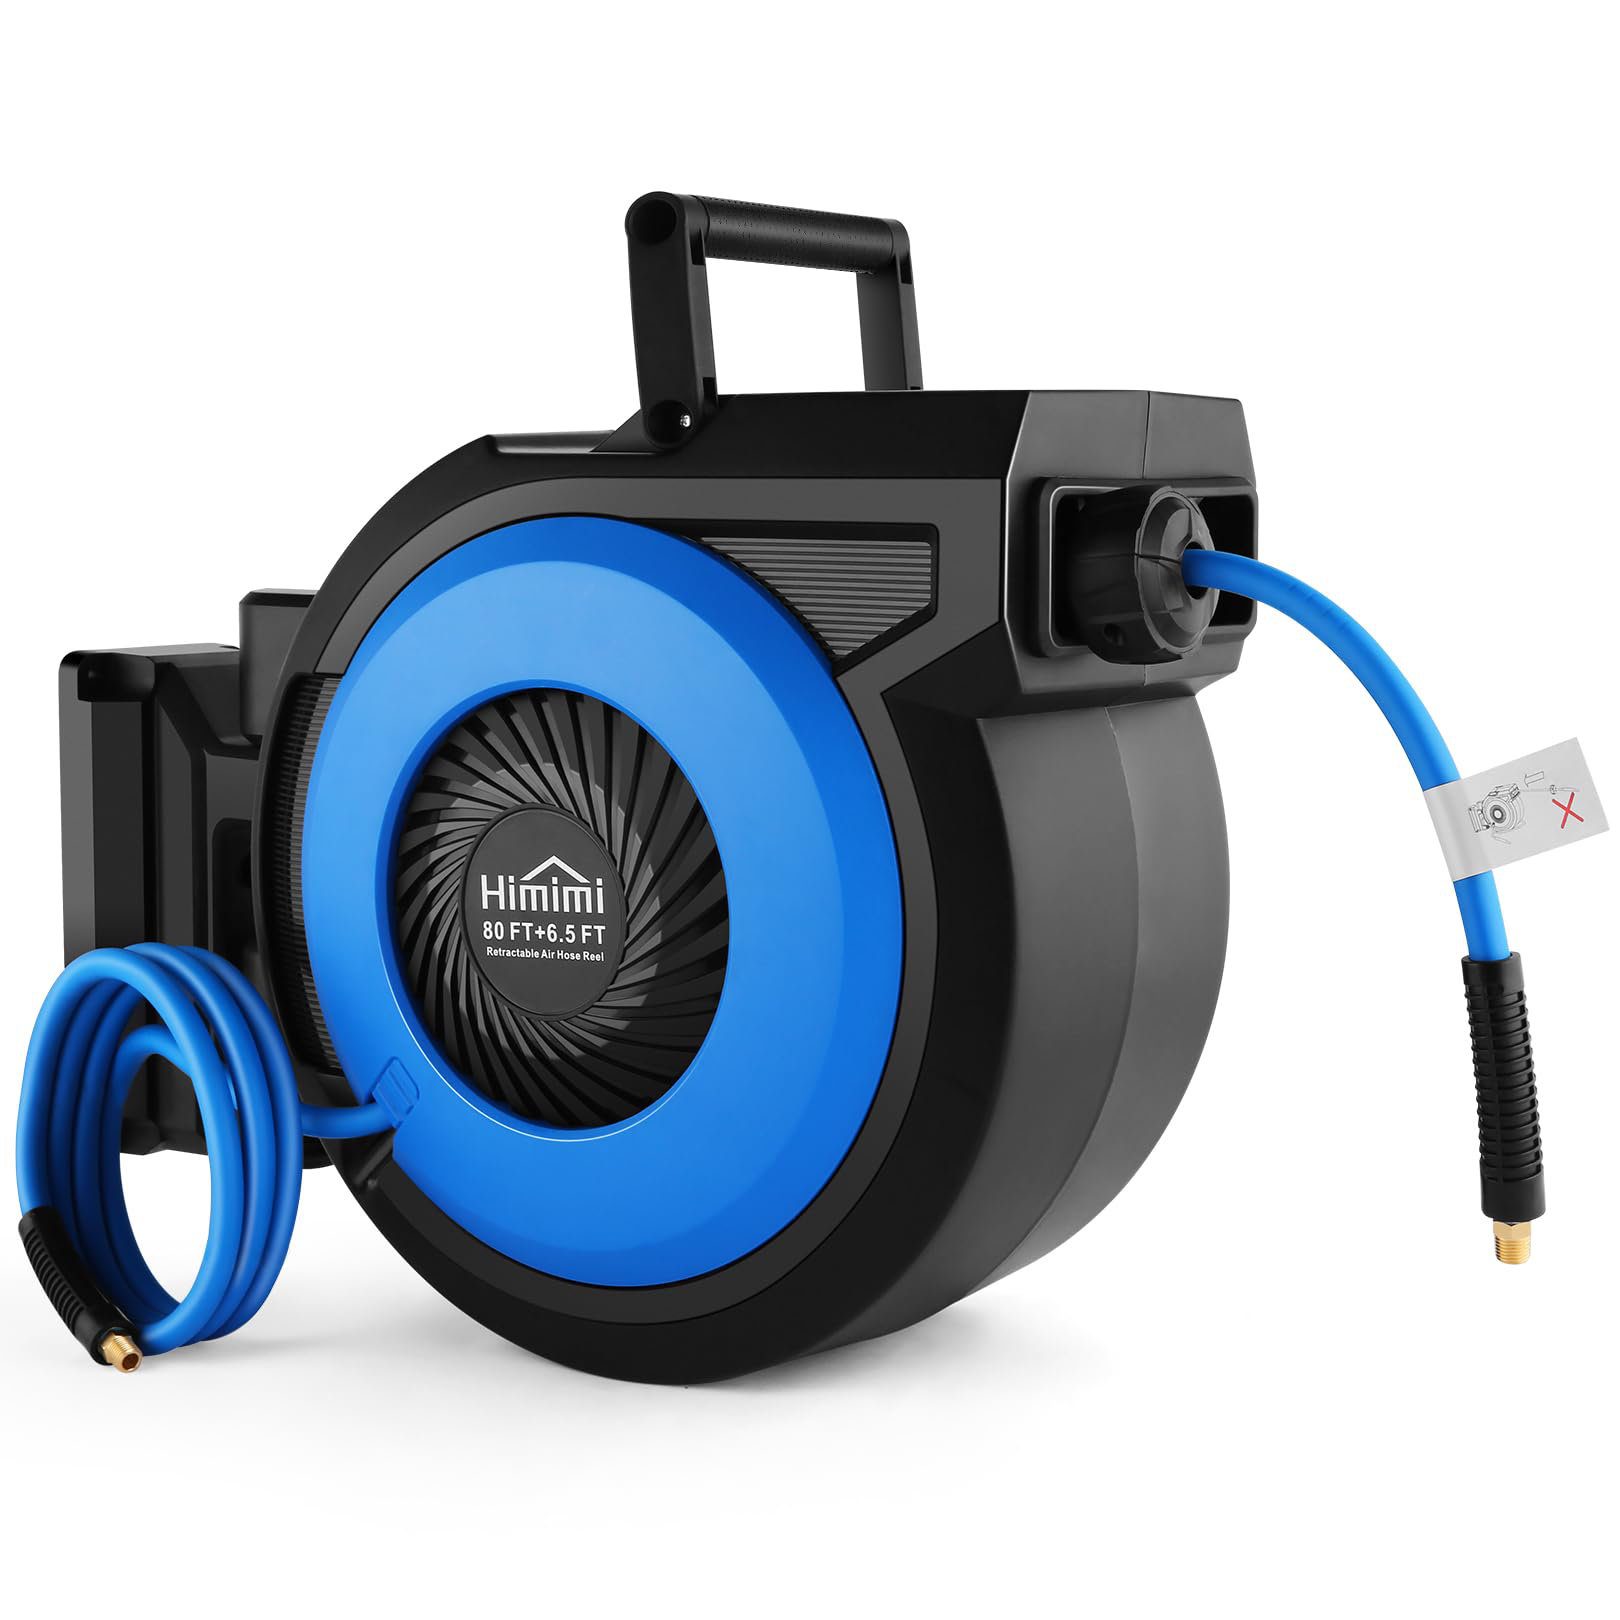 Himimi 80Ft Automatic Retractable Air Hose Reel Wall Mounted